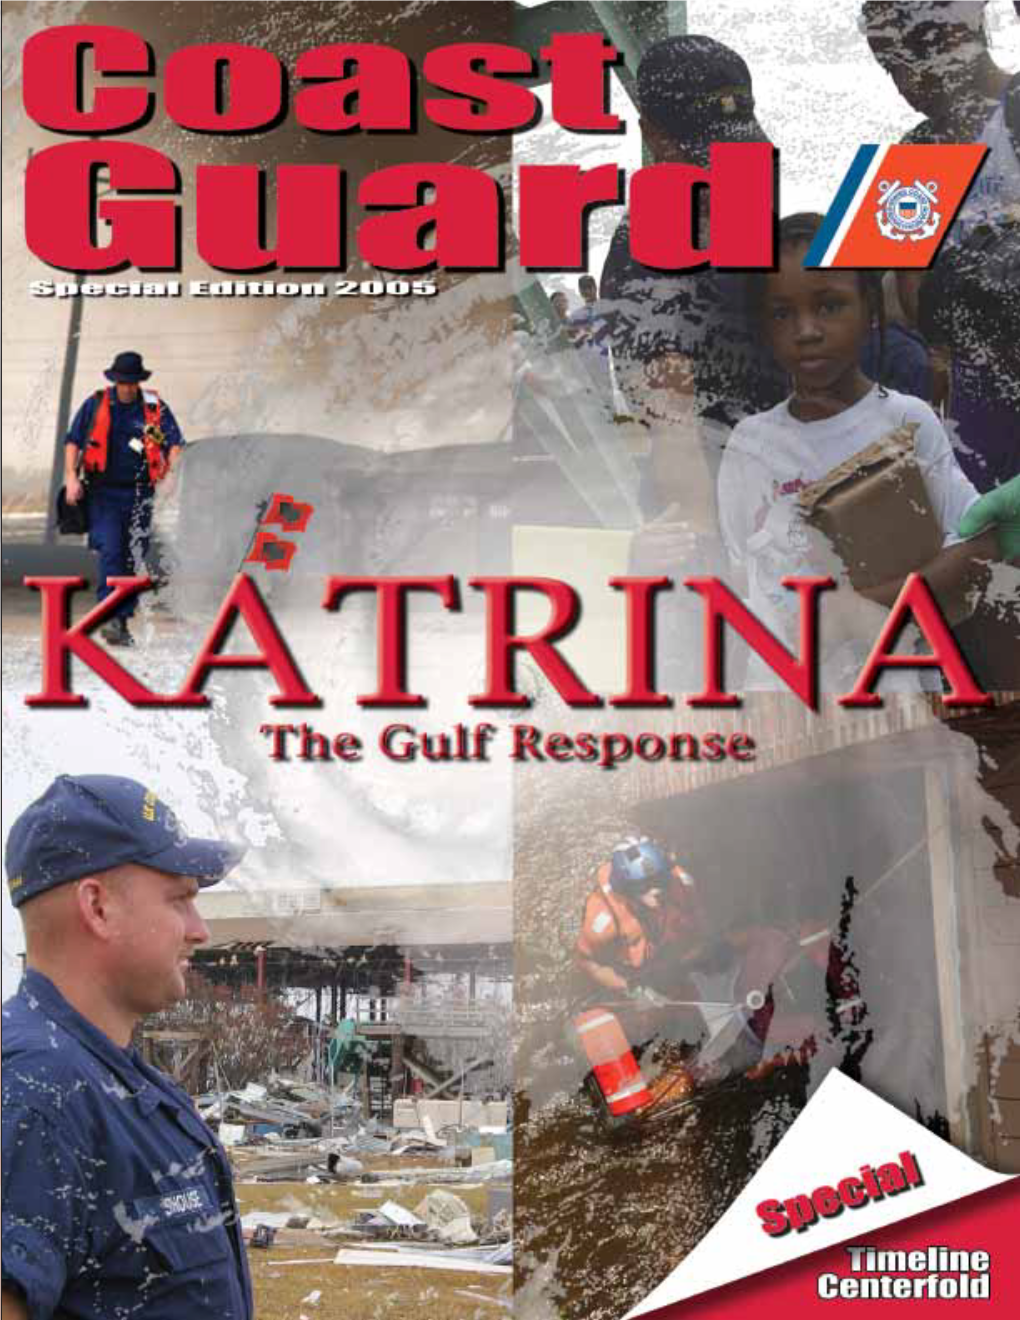 CISM Teams Travel the Gulf Coast Helping Peers Cope with Katrina Effects